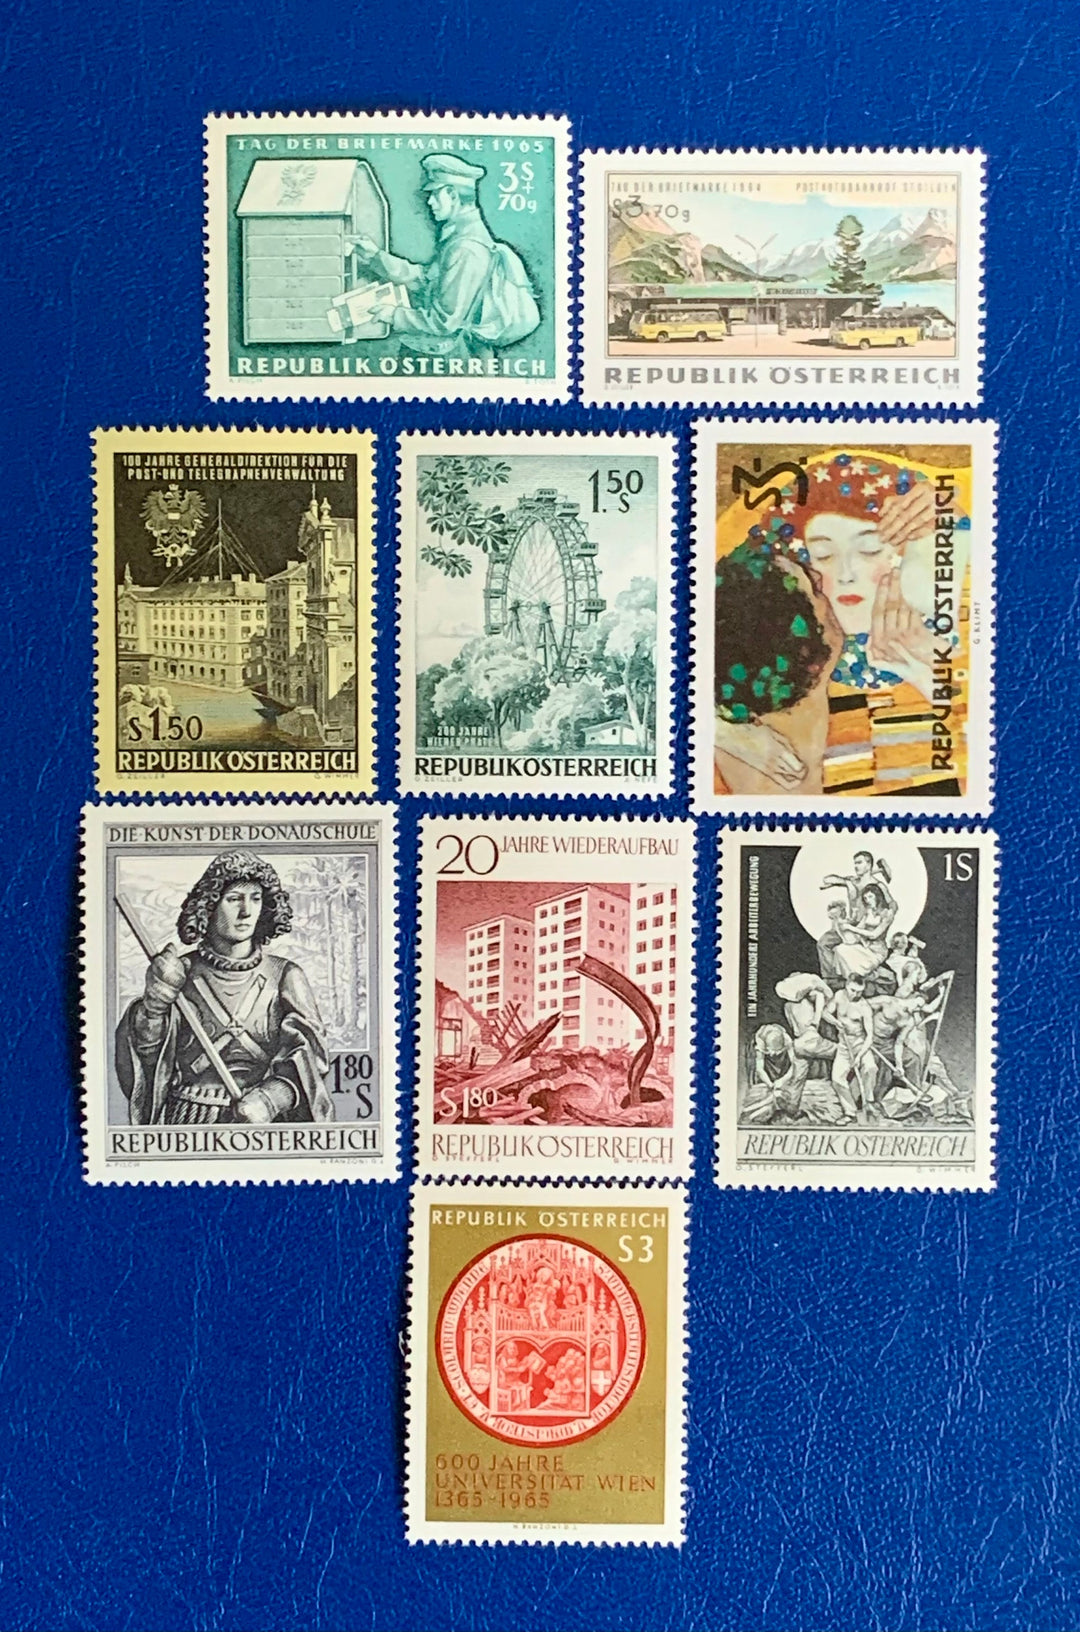 Austria - Original Vintage Postage Stamps - 1964-65 Mix - for the collector, artist or crafter - scrapbooks, decoupage